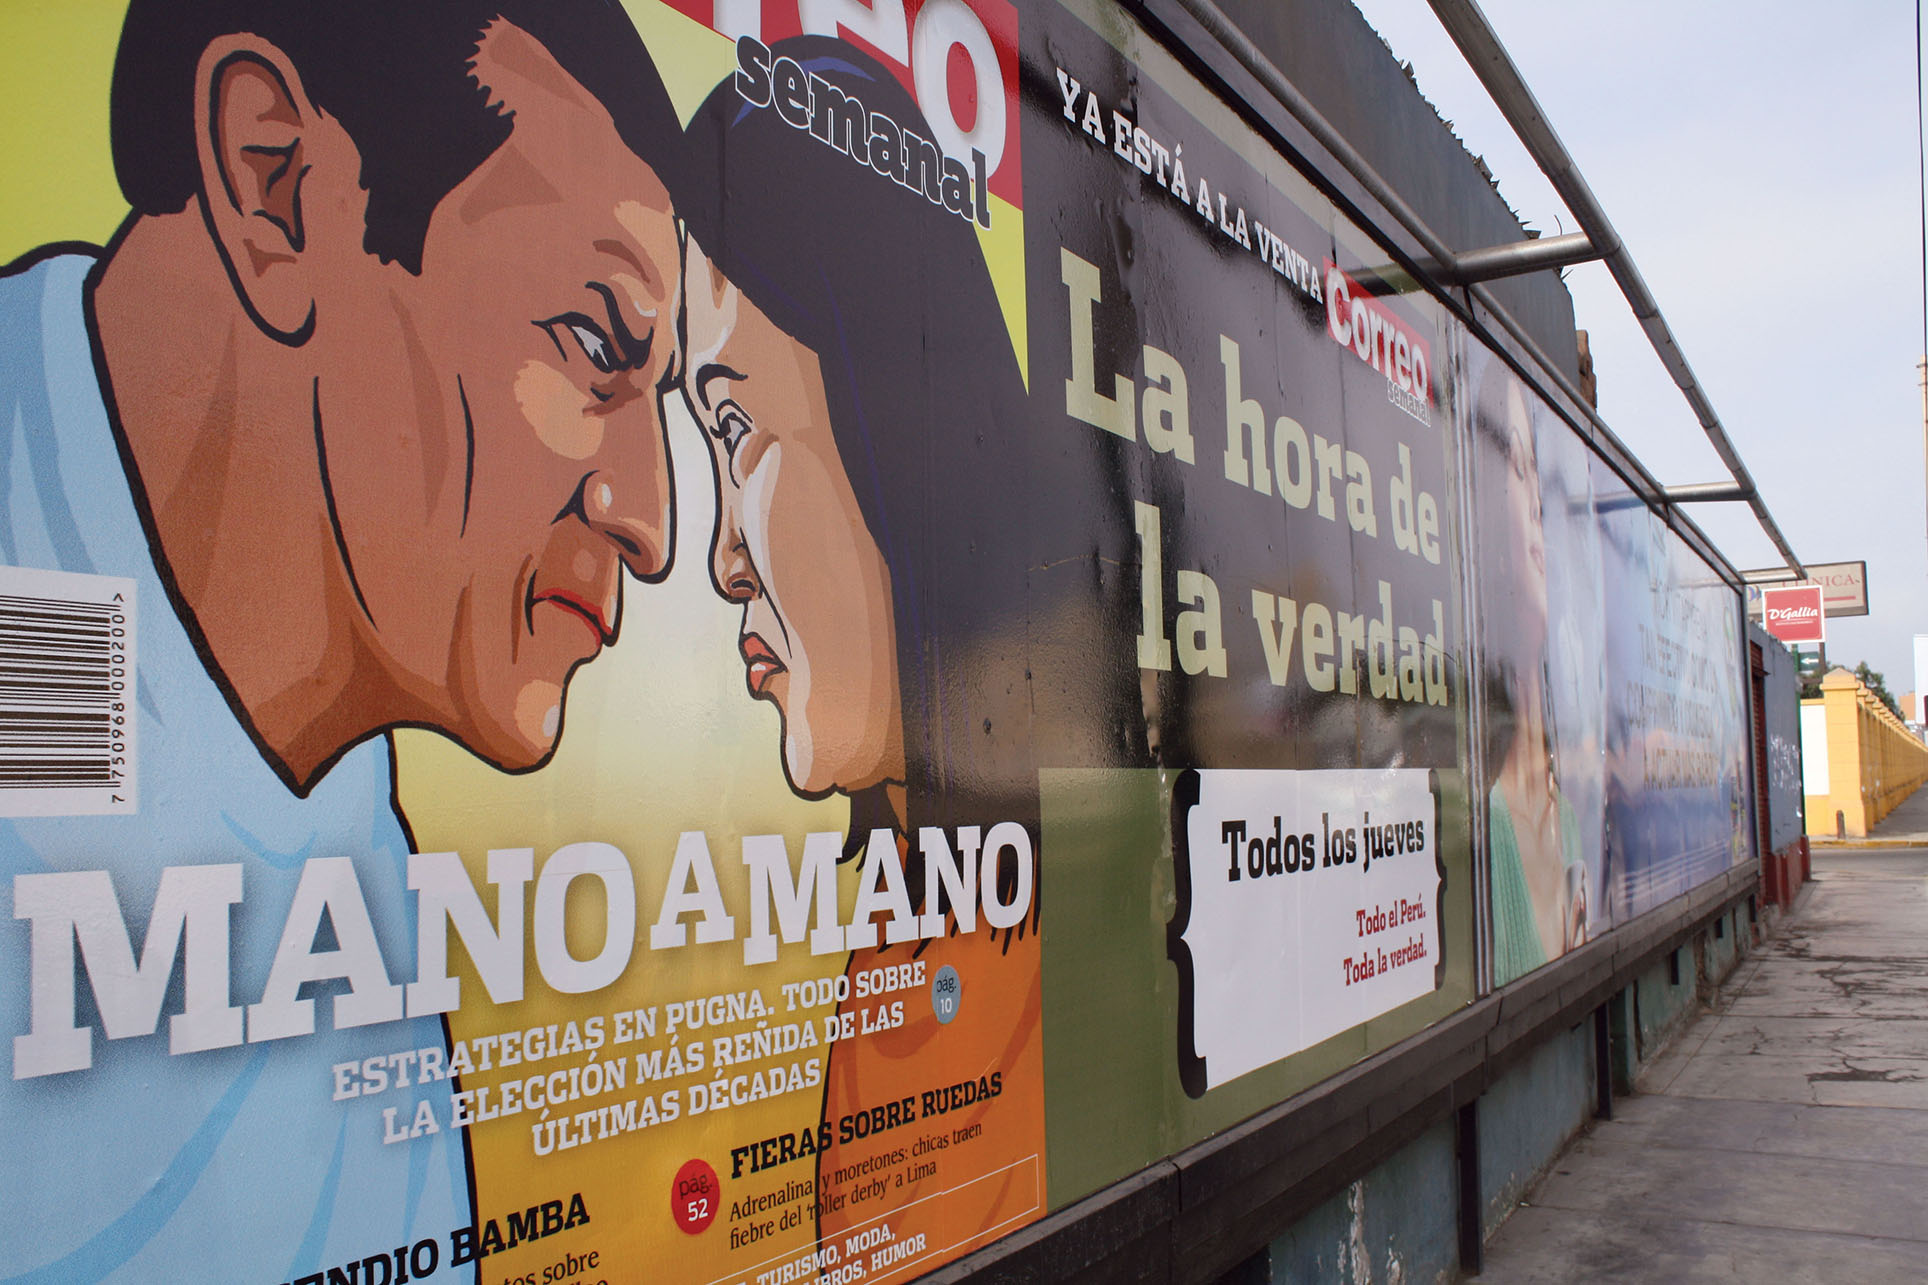 APeruvian billboard featuring a magazine cover announcing the upcoming presidential election face-off between Ollanta Humala and Keiko Fujimori. (Photo by Catherine Binet, The Advocacy Peace Project Fellow, 2011.)